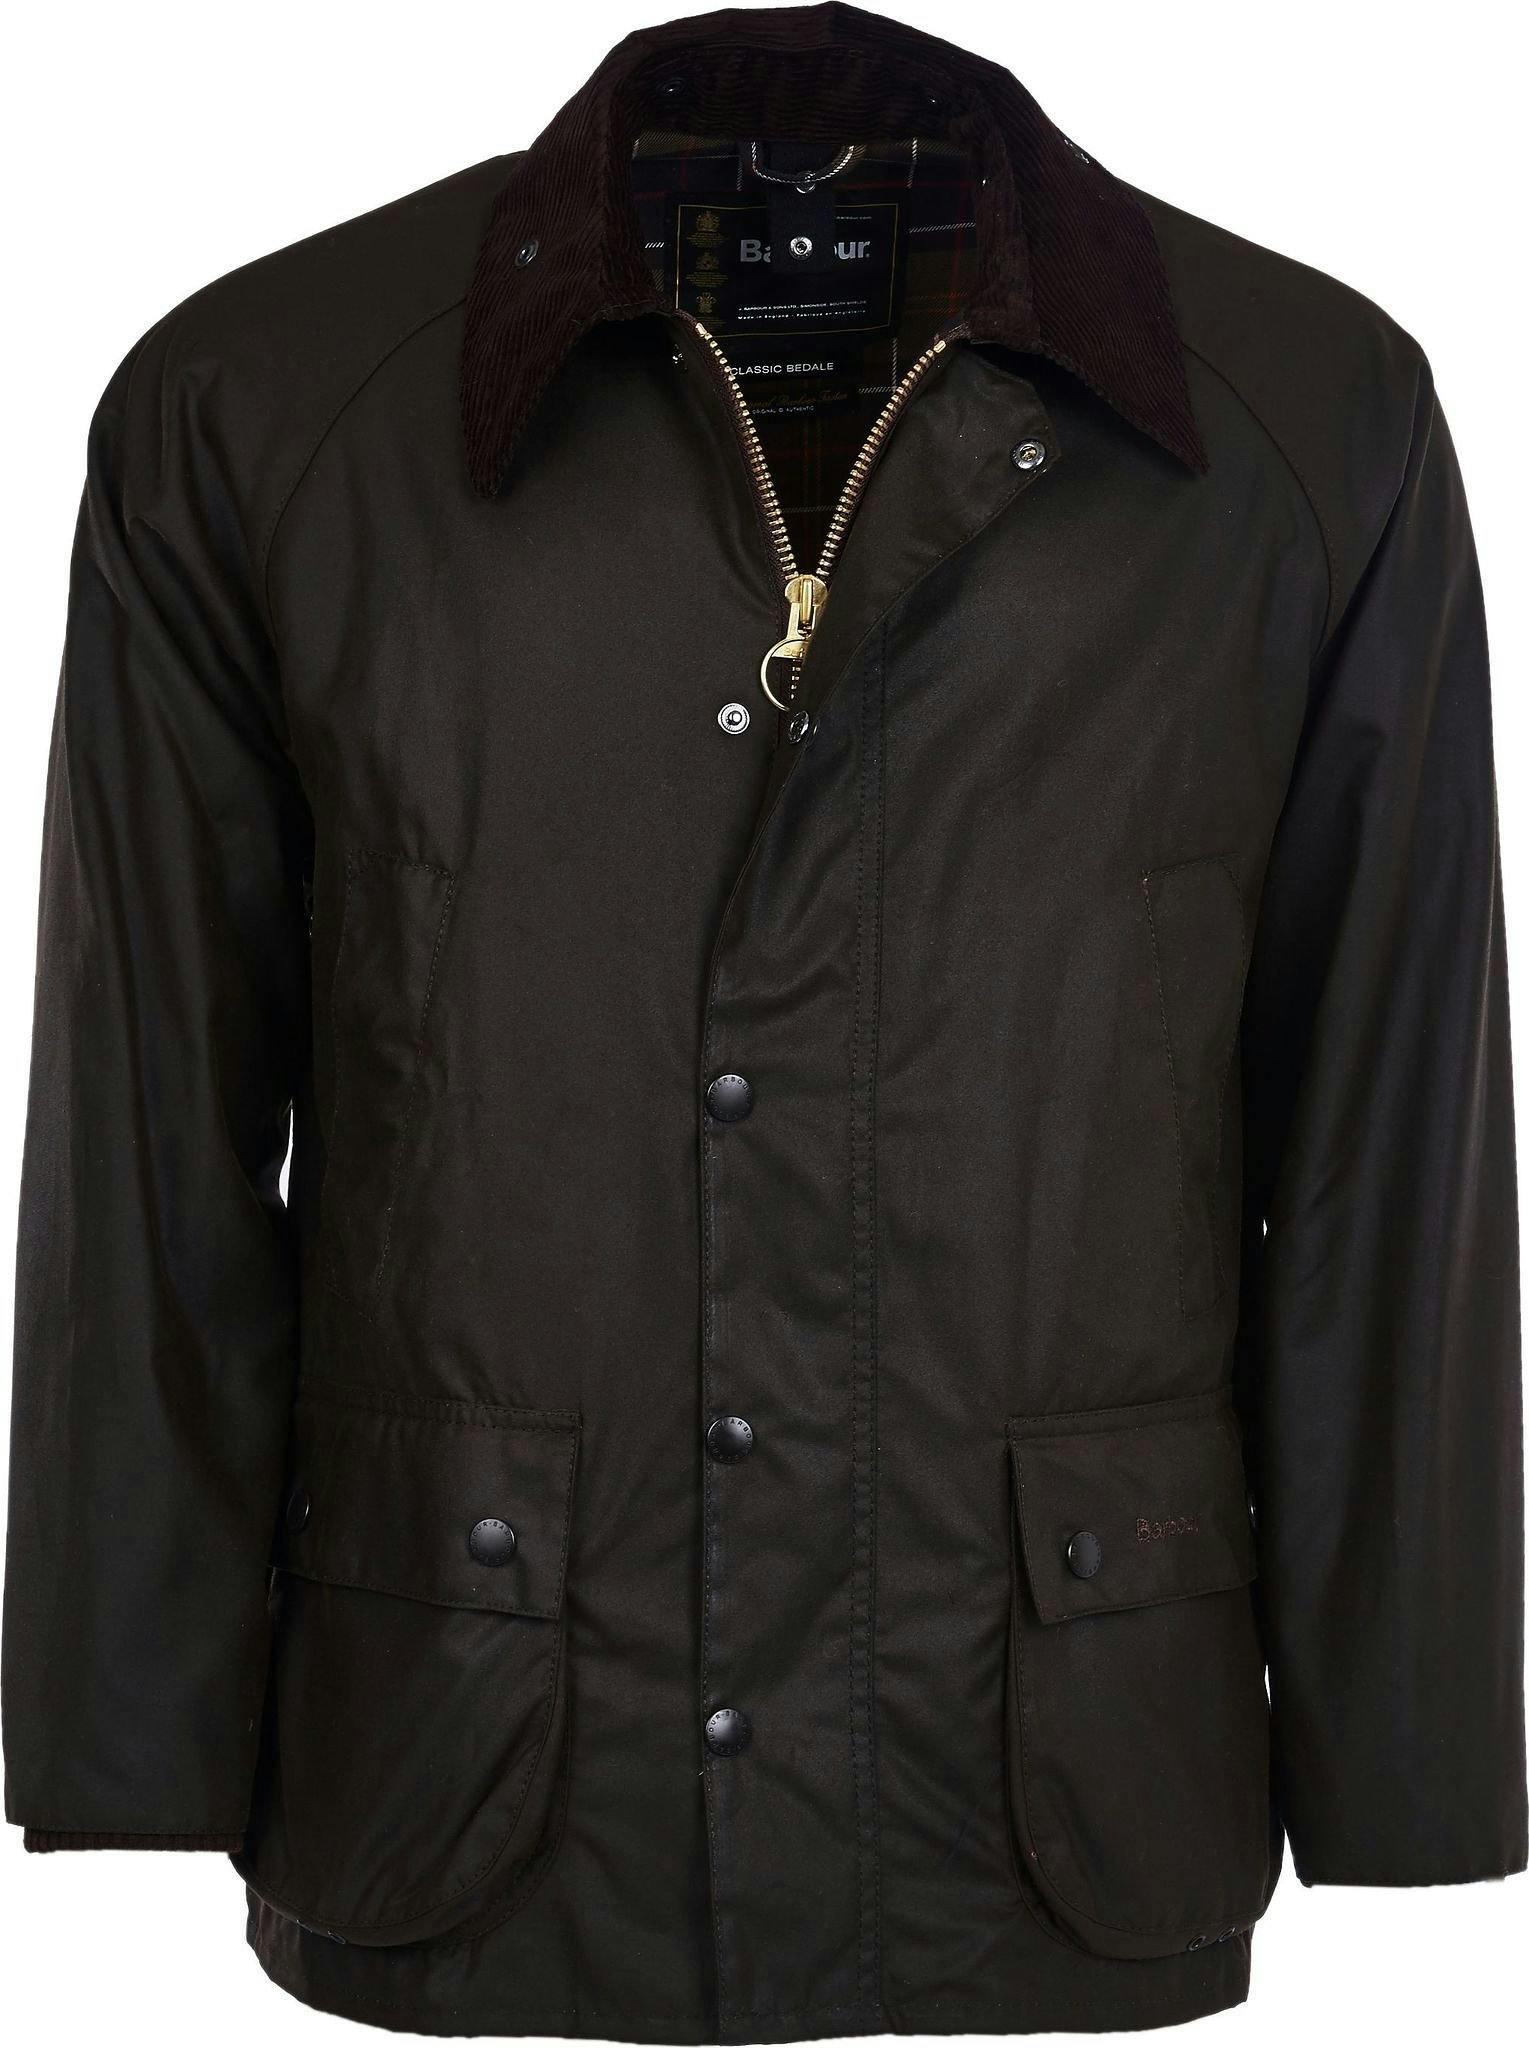 Product image for Classic Bedale Wax Jacket - Men's